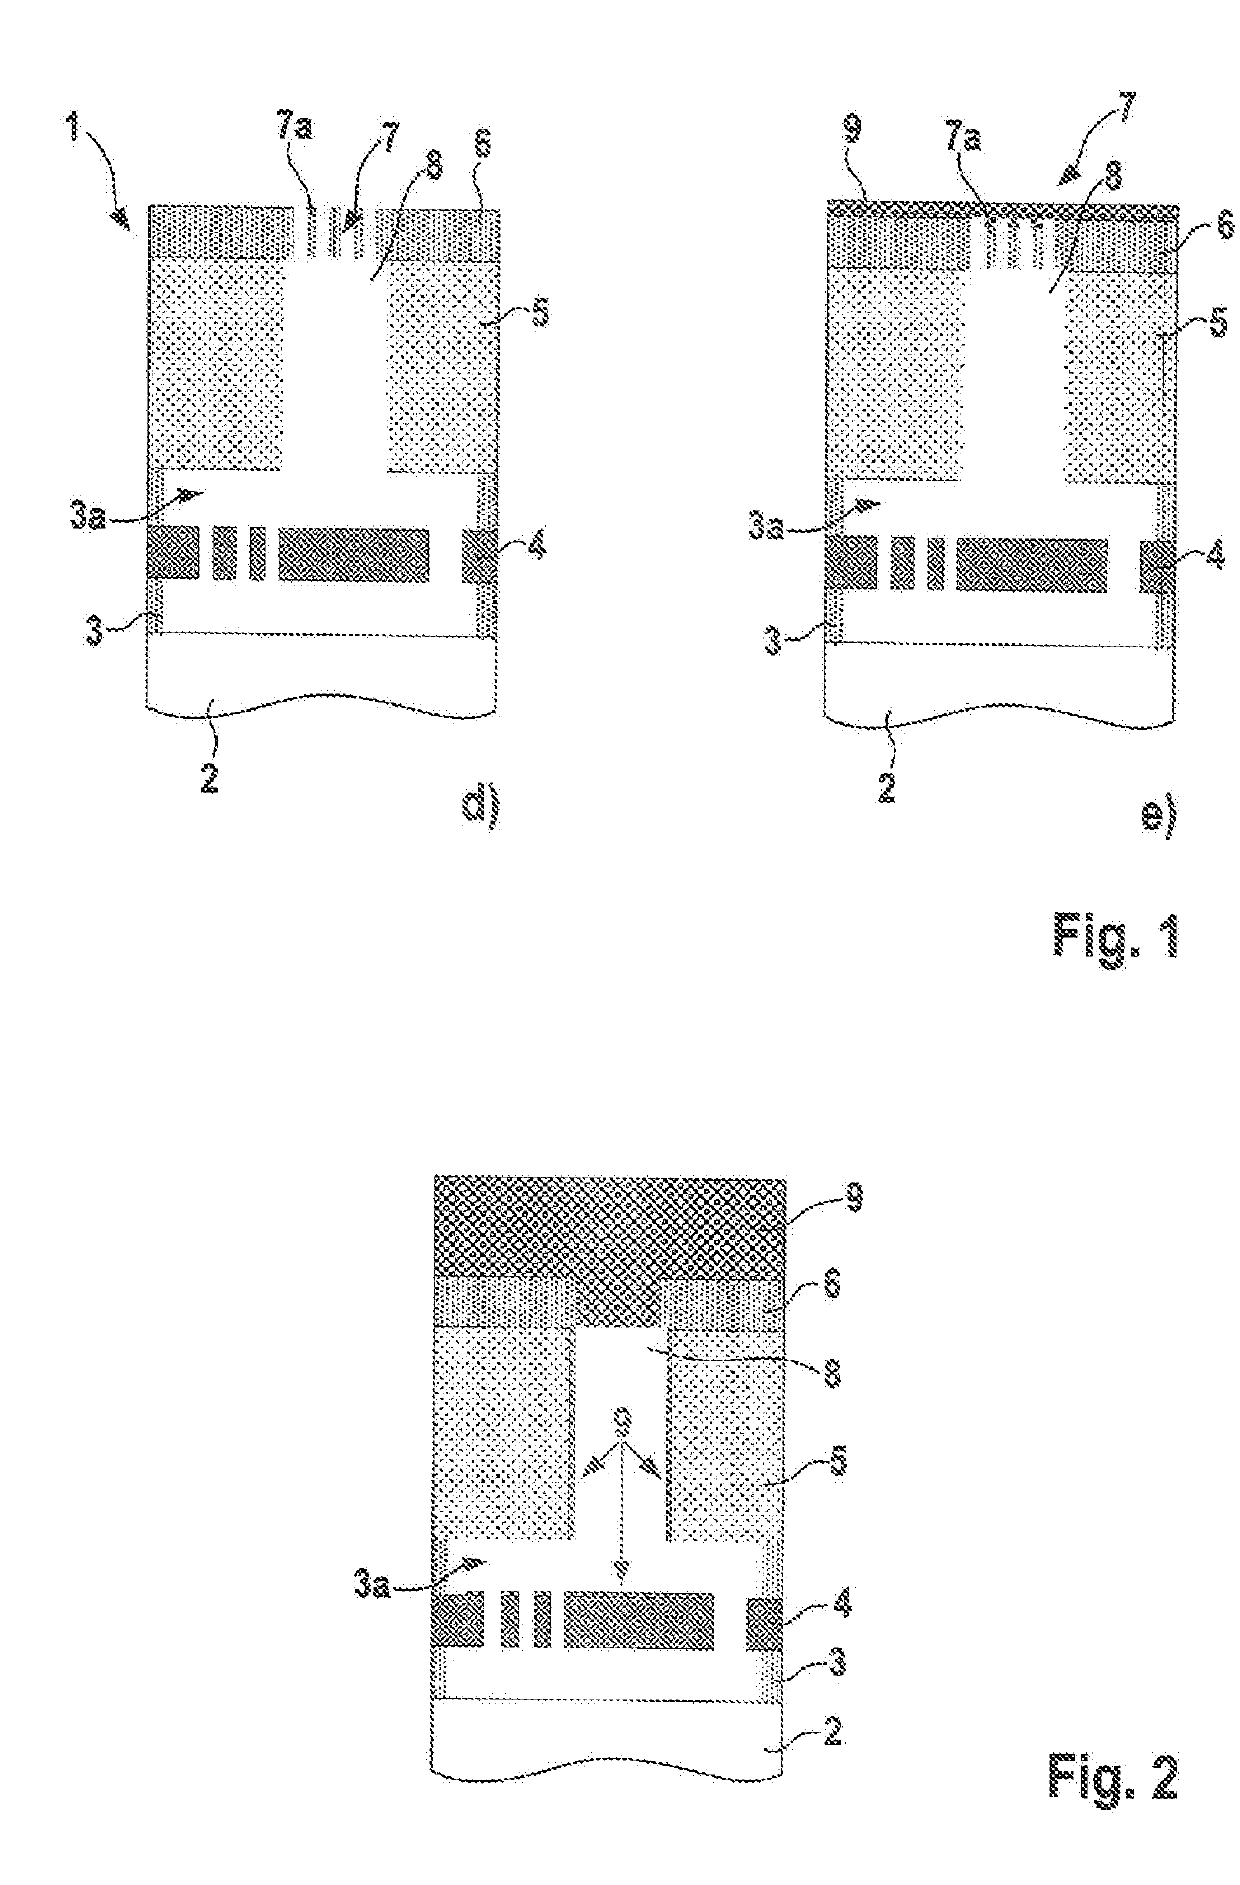 Method for Producing a Micromechanical Element